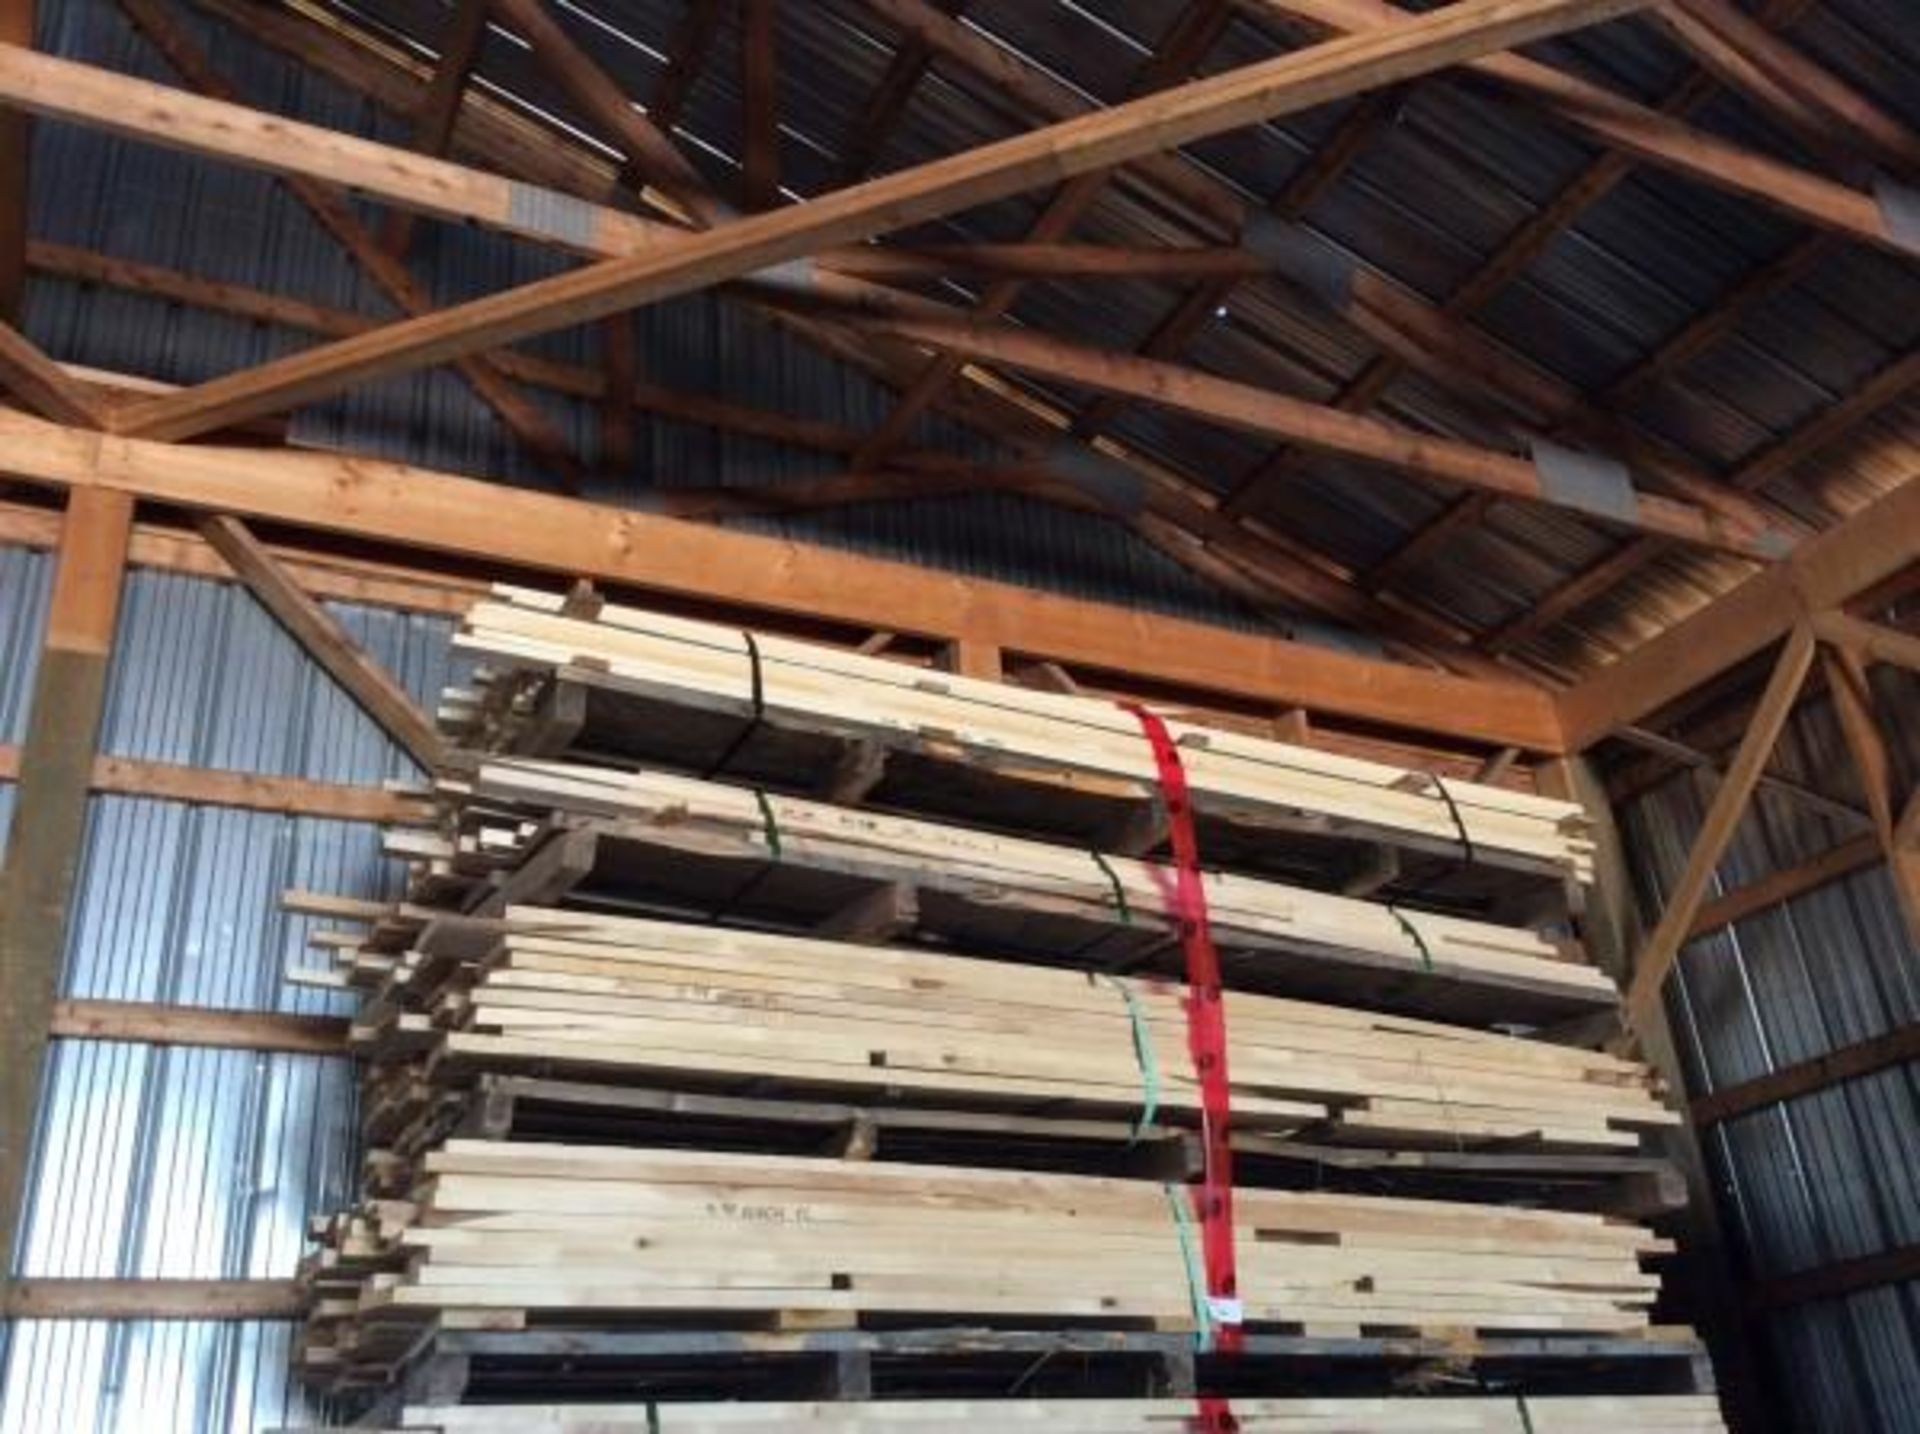 4 LIFTS OF 2 RED MAPLE AND 2 BIRCH BOARDS 8'L 1"T 1-6" W APROX 350 PCS - E